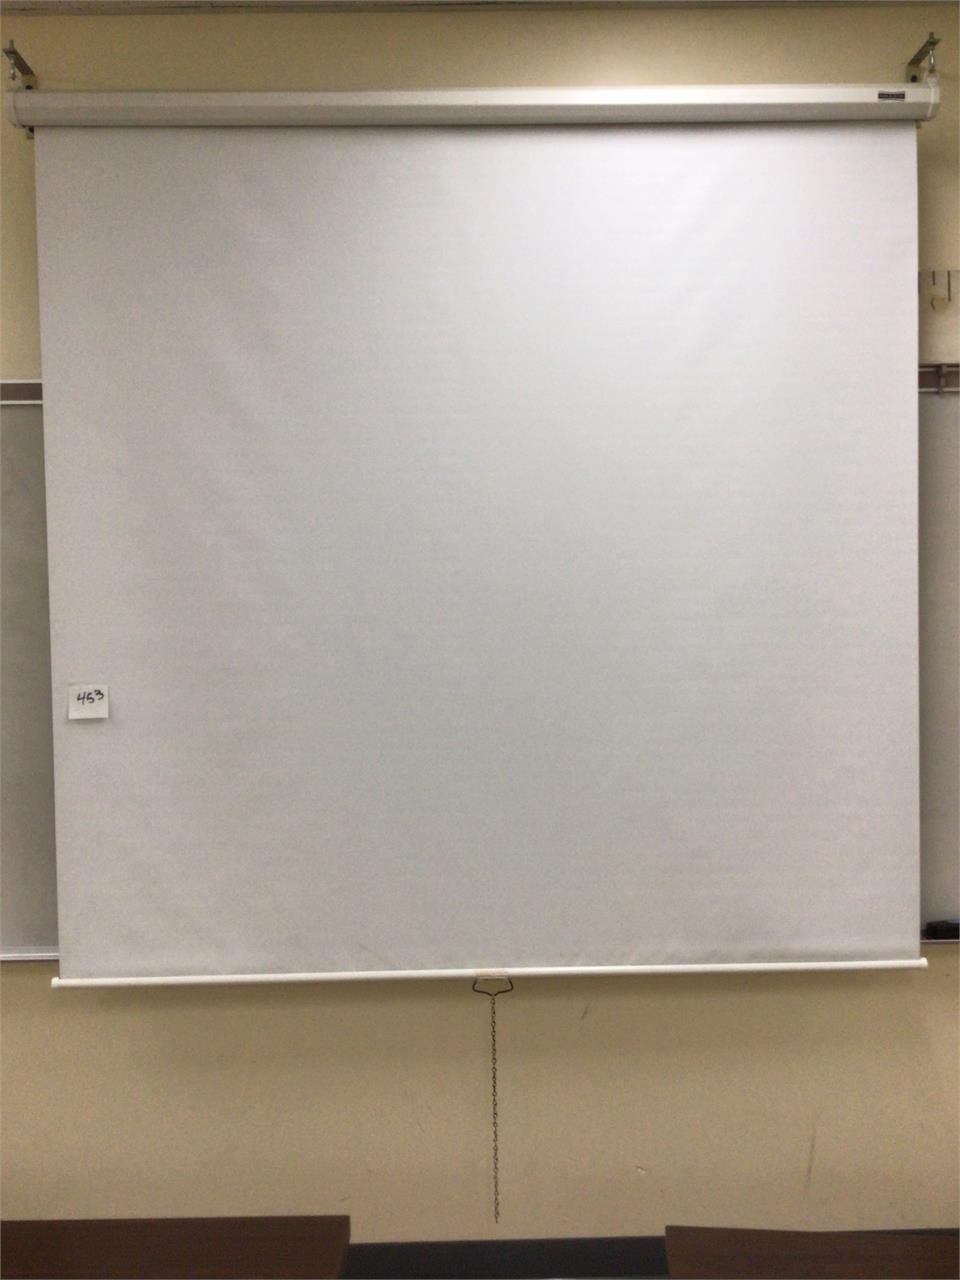 Retractable Projector Screen pull down projection